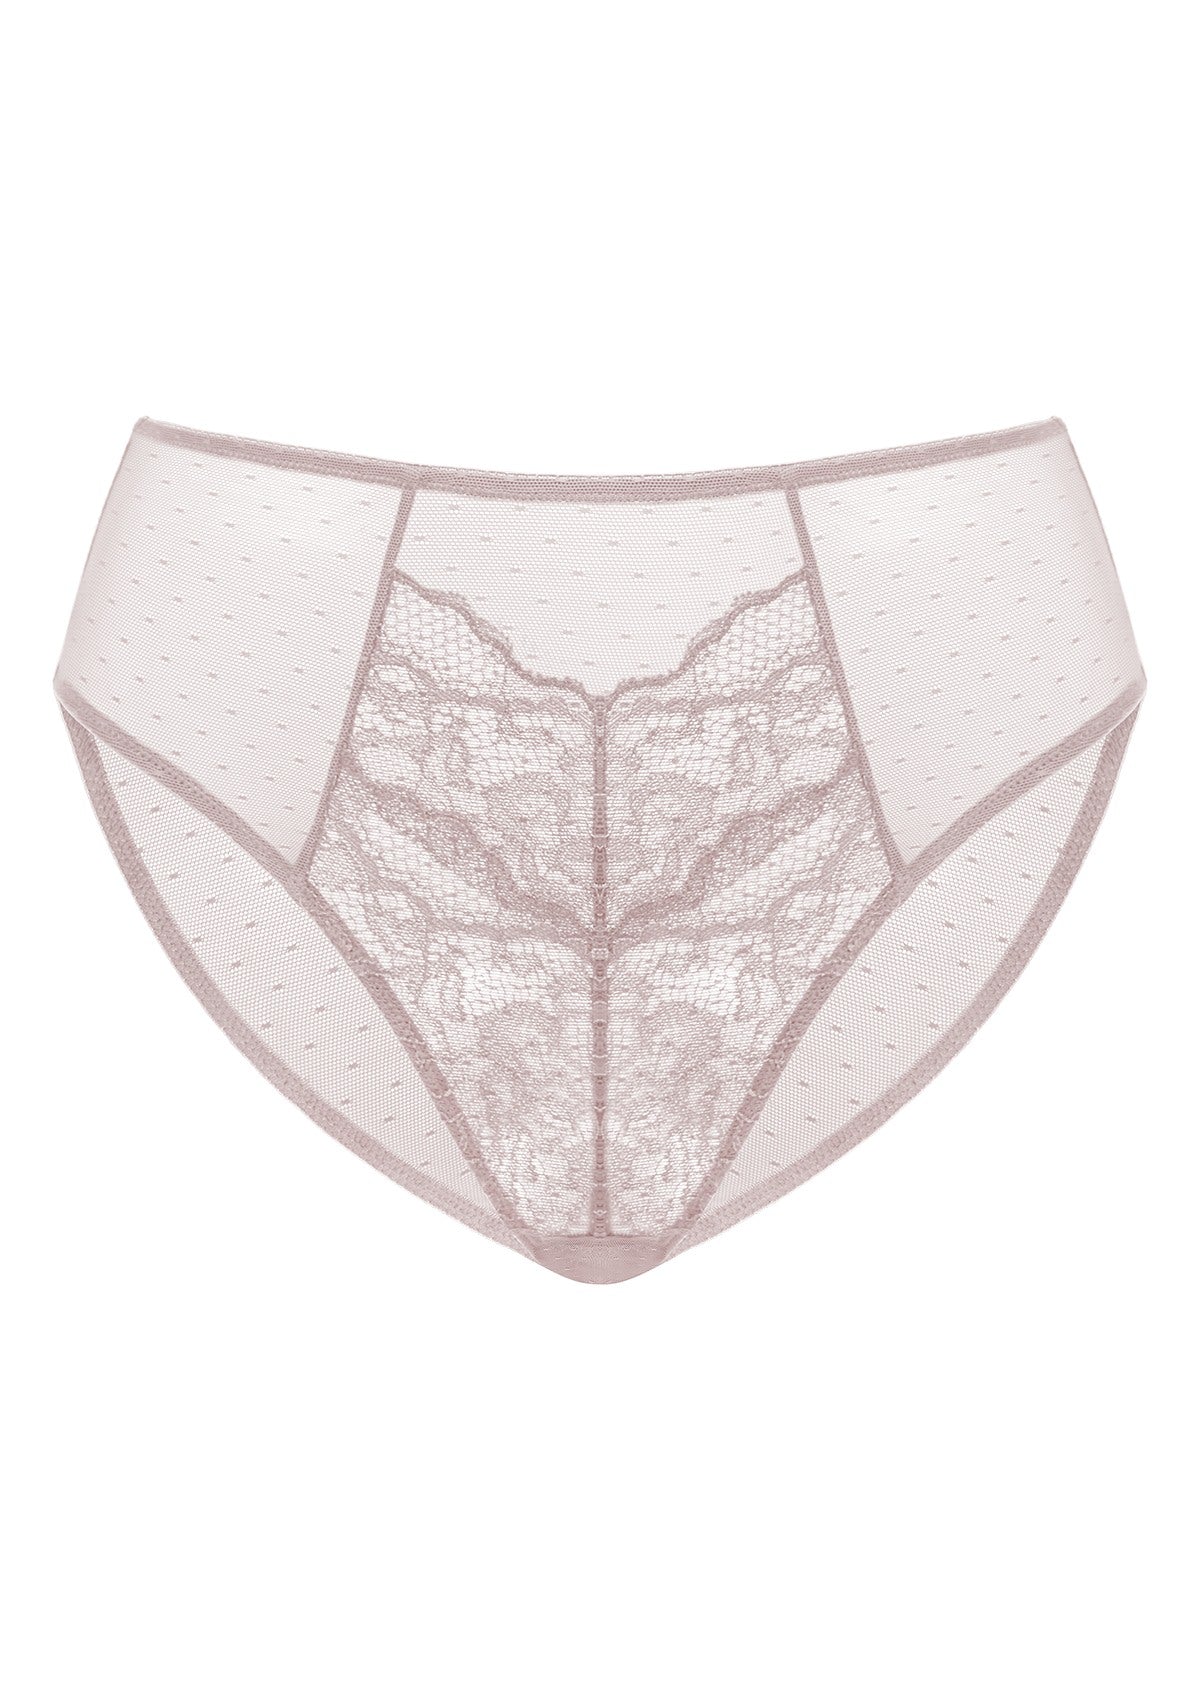 HSIA Enchante High-Rise Floral Lacy Panty-Comfort In Style - XL / Dark Pink